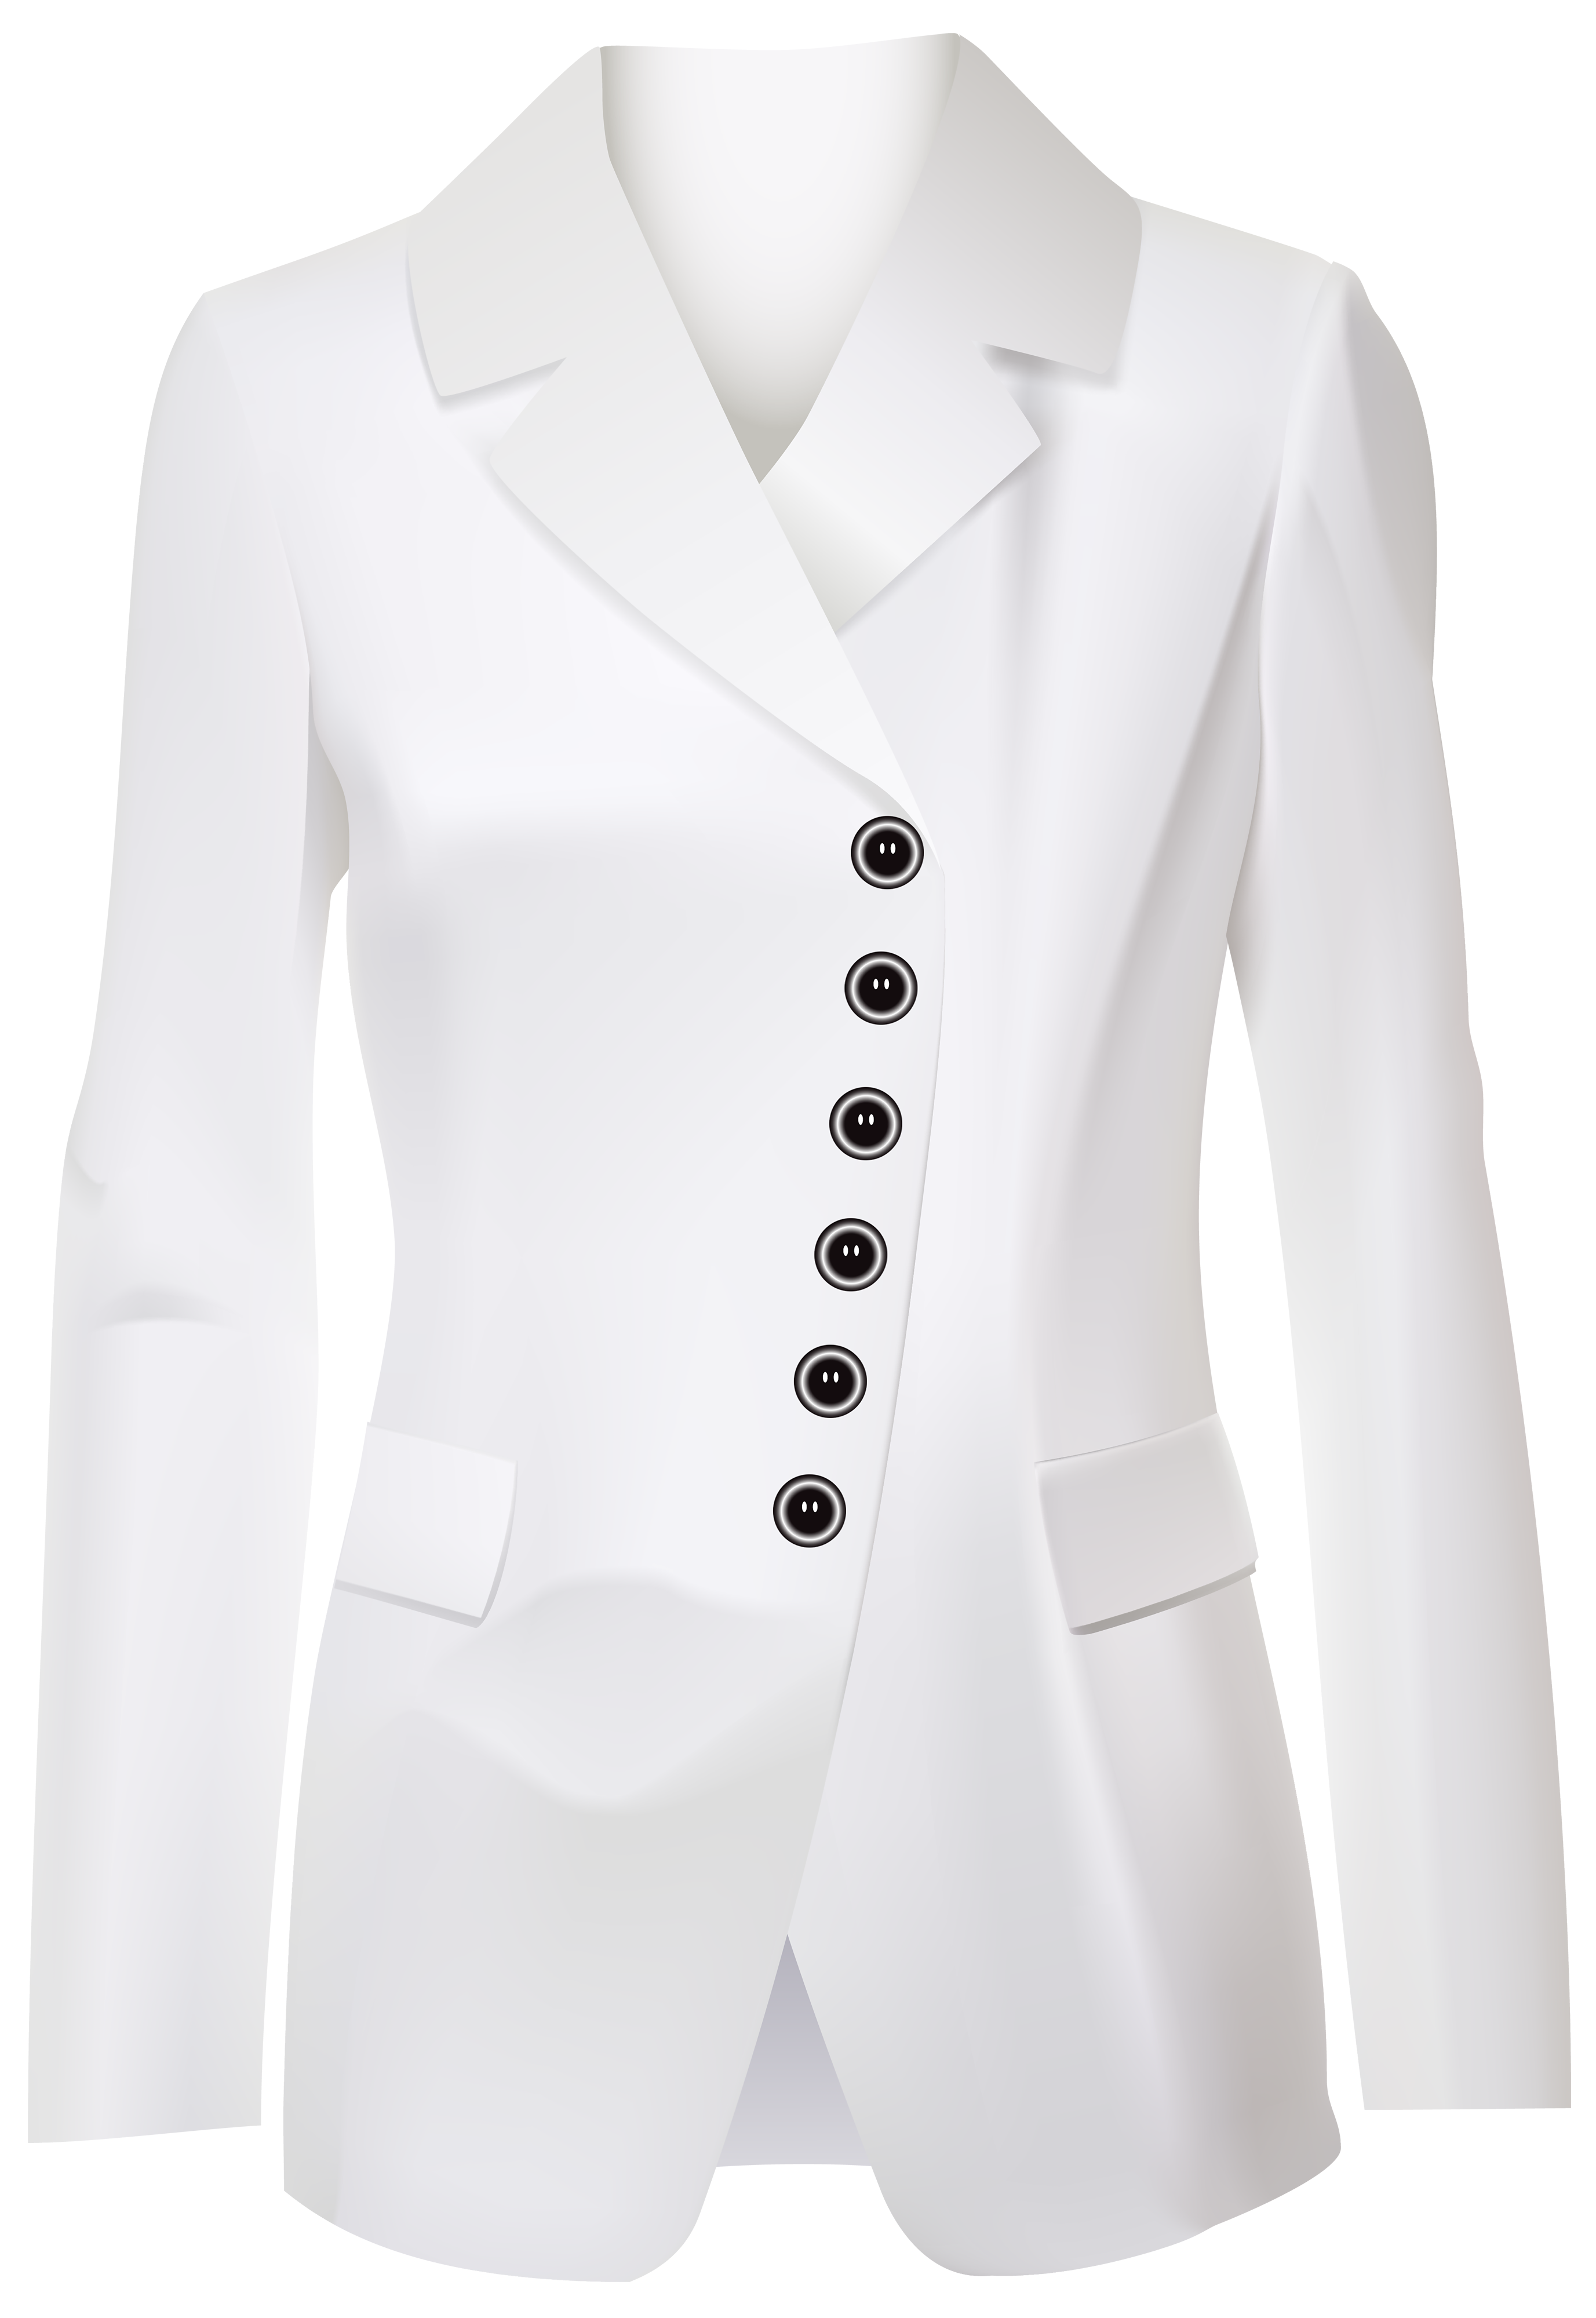 Female White Jacket PNG Clipart - Best WEB Clipart